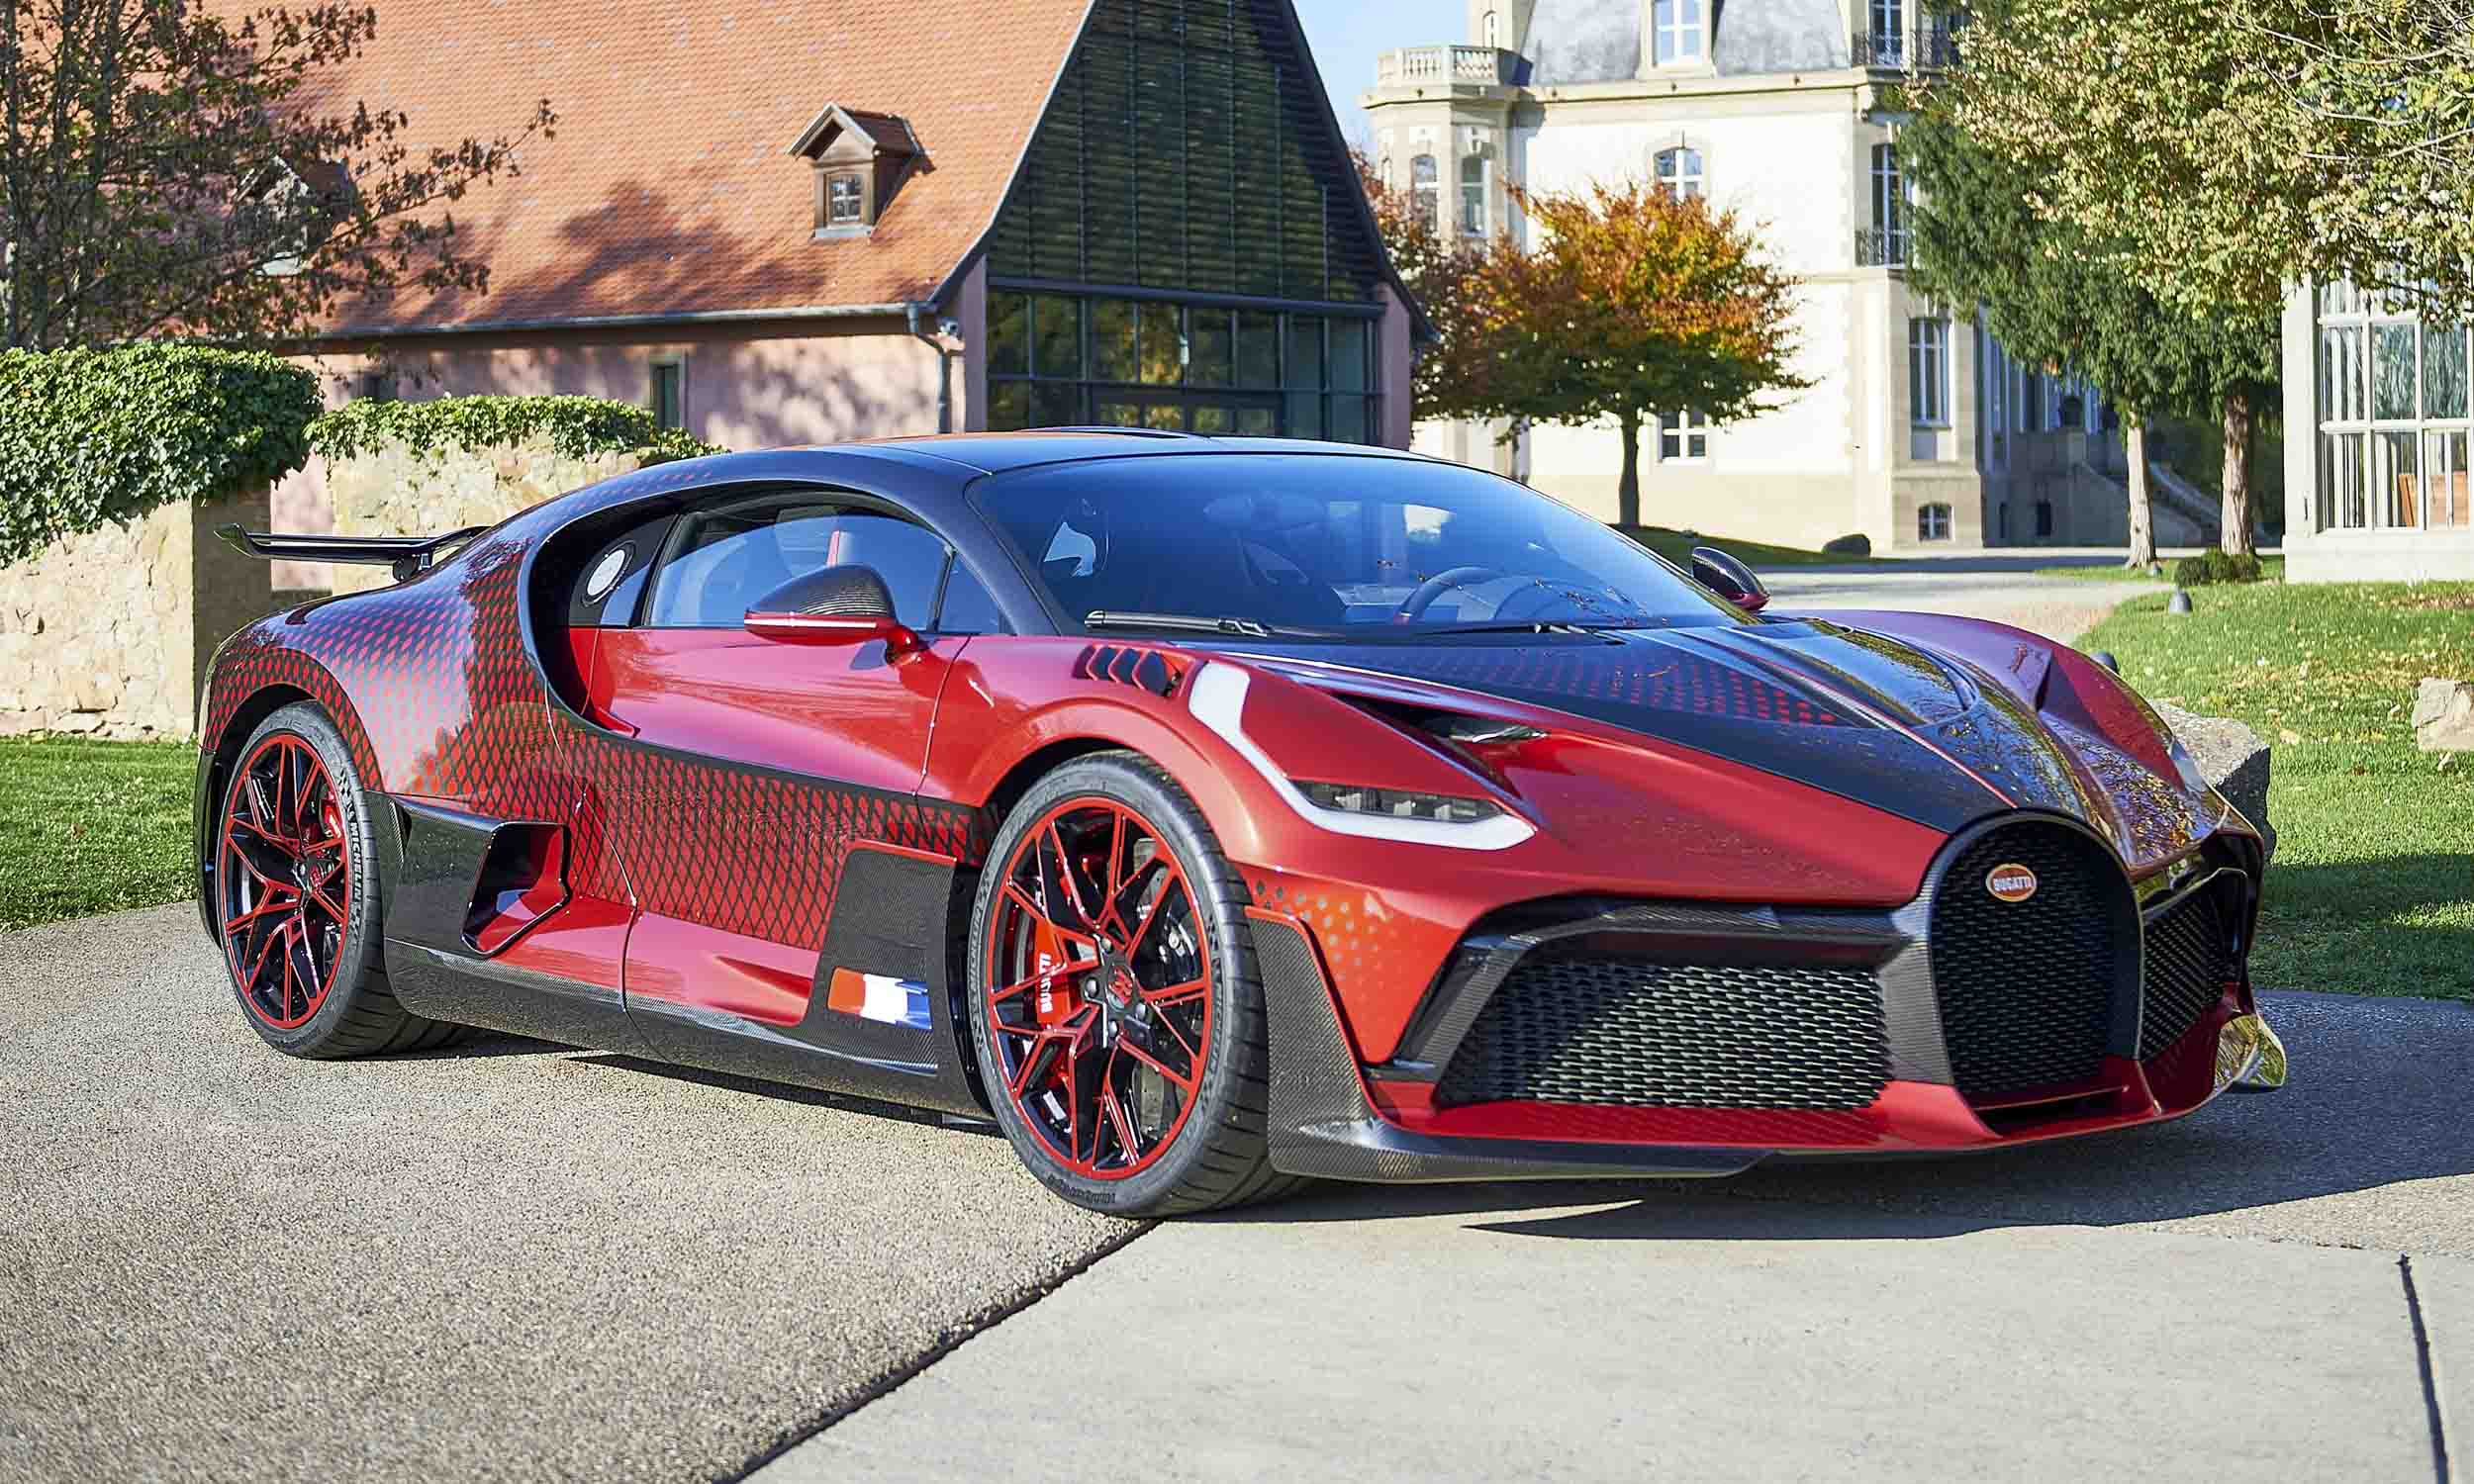 <p>          Total Production: 40 Vehicles<br> Price: €5 million (US$6.1 million)<br> Named for the French racing driver and two-time Targa Florio winner Albert Divo, the Divo was developed to be more agile than the Chiron and optimized for exceptional handling on winding roads or the track. With styling slightly different from the Chiron, the Divo features vertical front lights with daytime running lights on the outer edges, giving it an appearance of greater width. The horizontal split into a lower carbon and an upper matte silver section also makes the Divo look lower and wider. The Divo was lighter with improved suspension, brakes, and downforce, making it the best handling version of the Chiron.         </p>